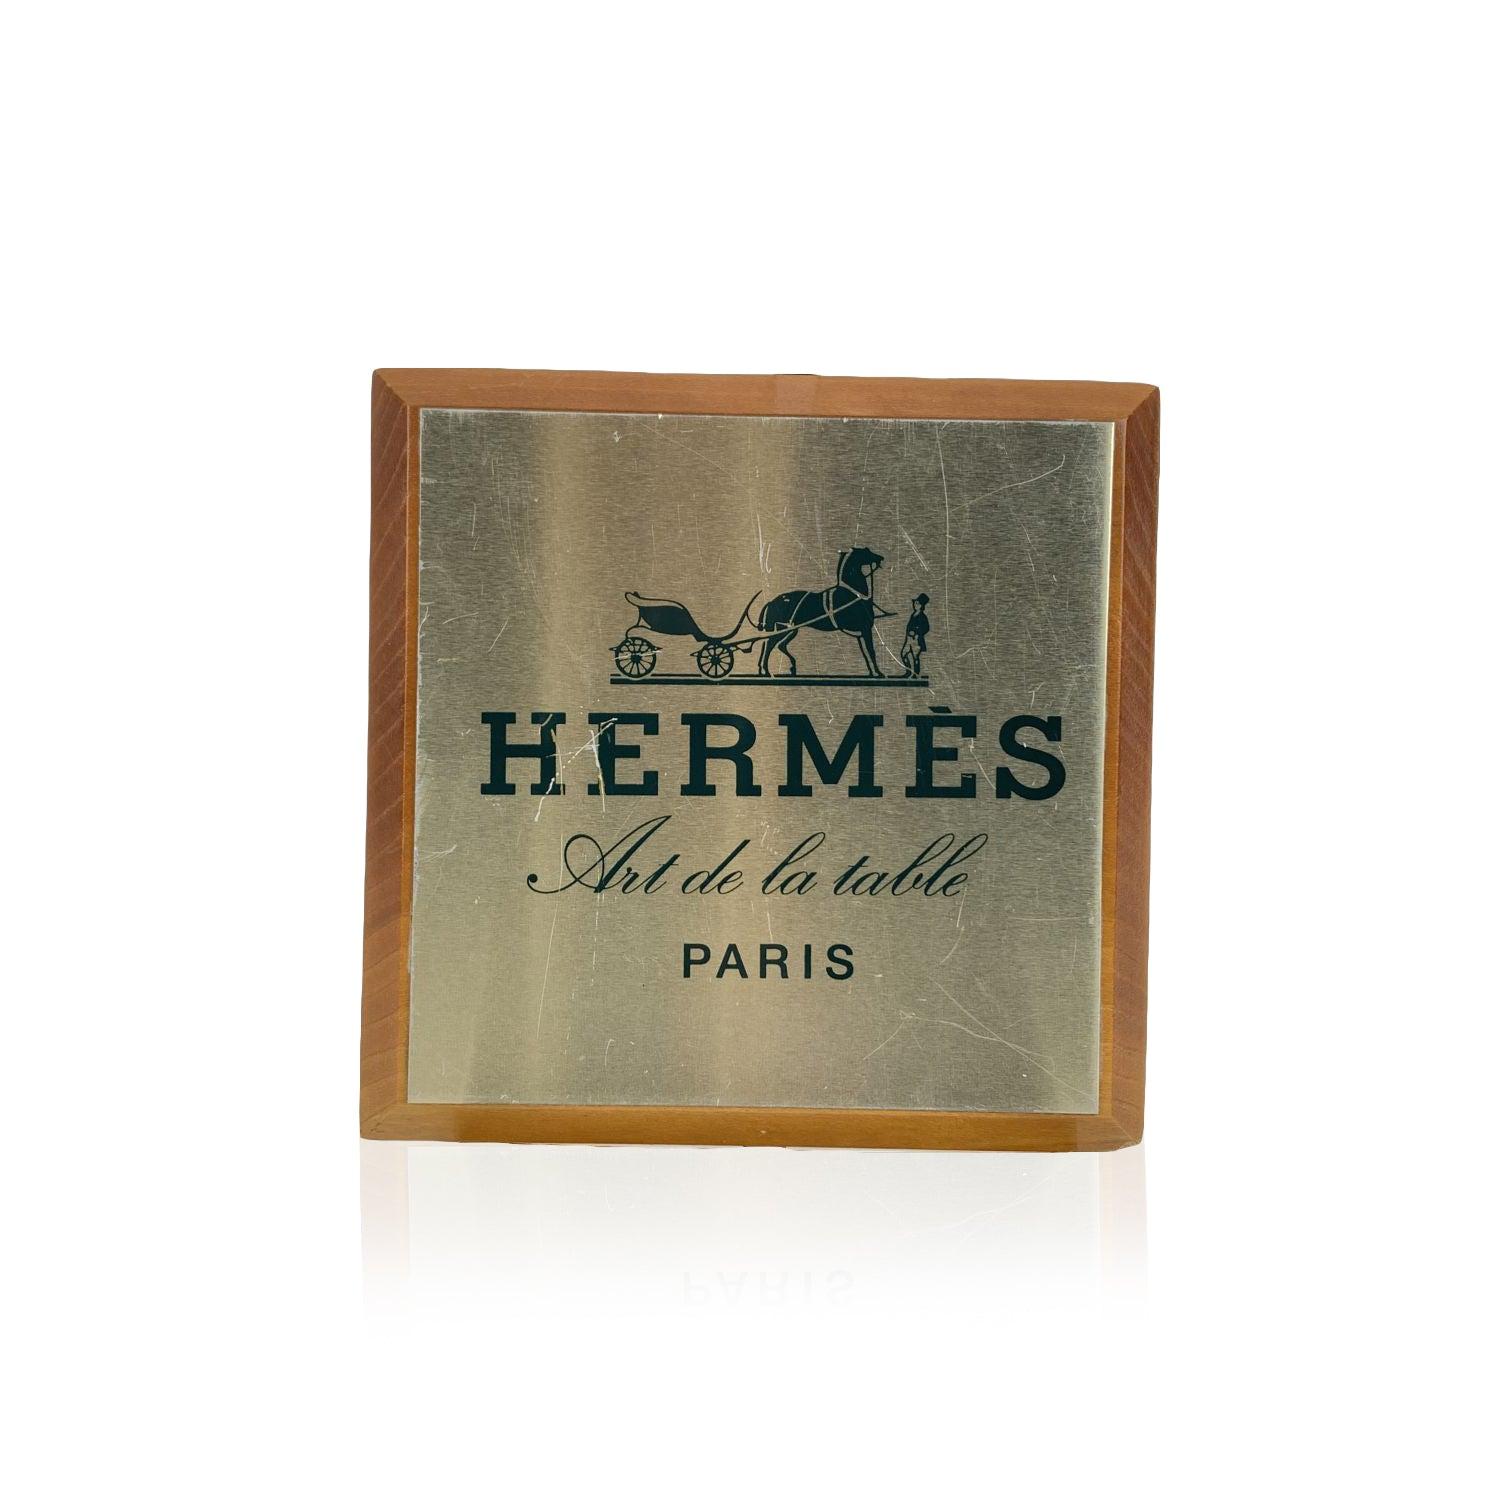 Vintage Hermes Shelf talker/Plate with 'Hermes Art de la table - Paris' lettering. Square-shaped. Made in wood, with upper side in light gold colored metal. Measurements: 6.5 x 6.5 inches - 16,5 x 16,5 cm Details MATERIAL: Wood COLOR: Gold MODEL: -